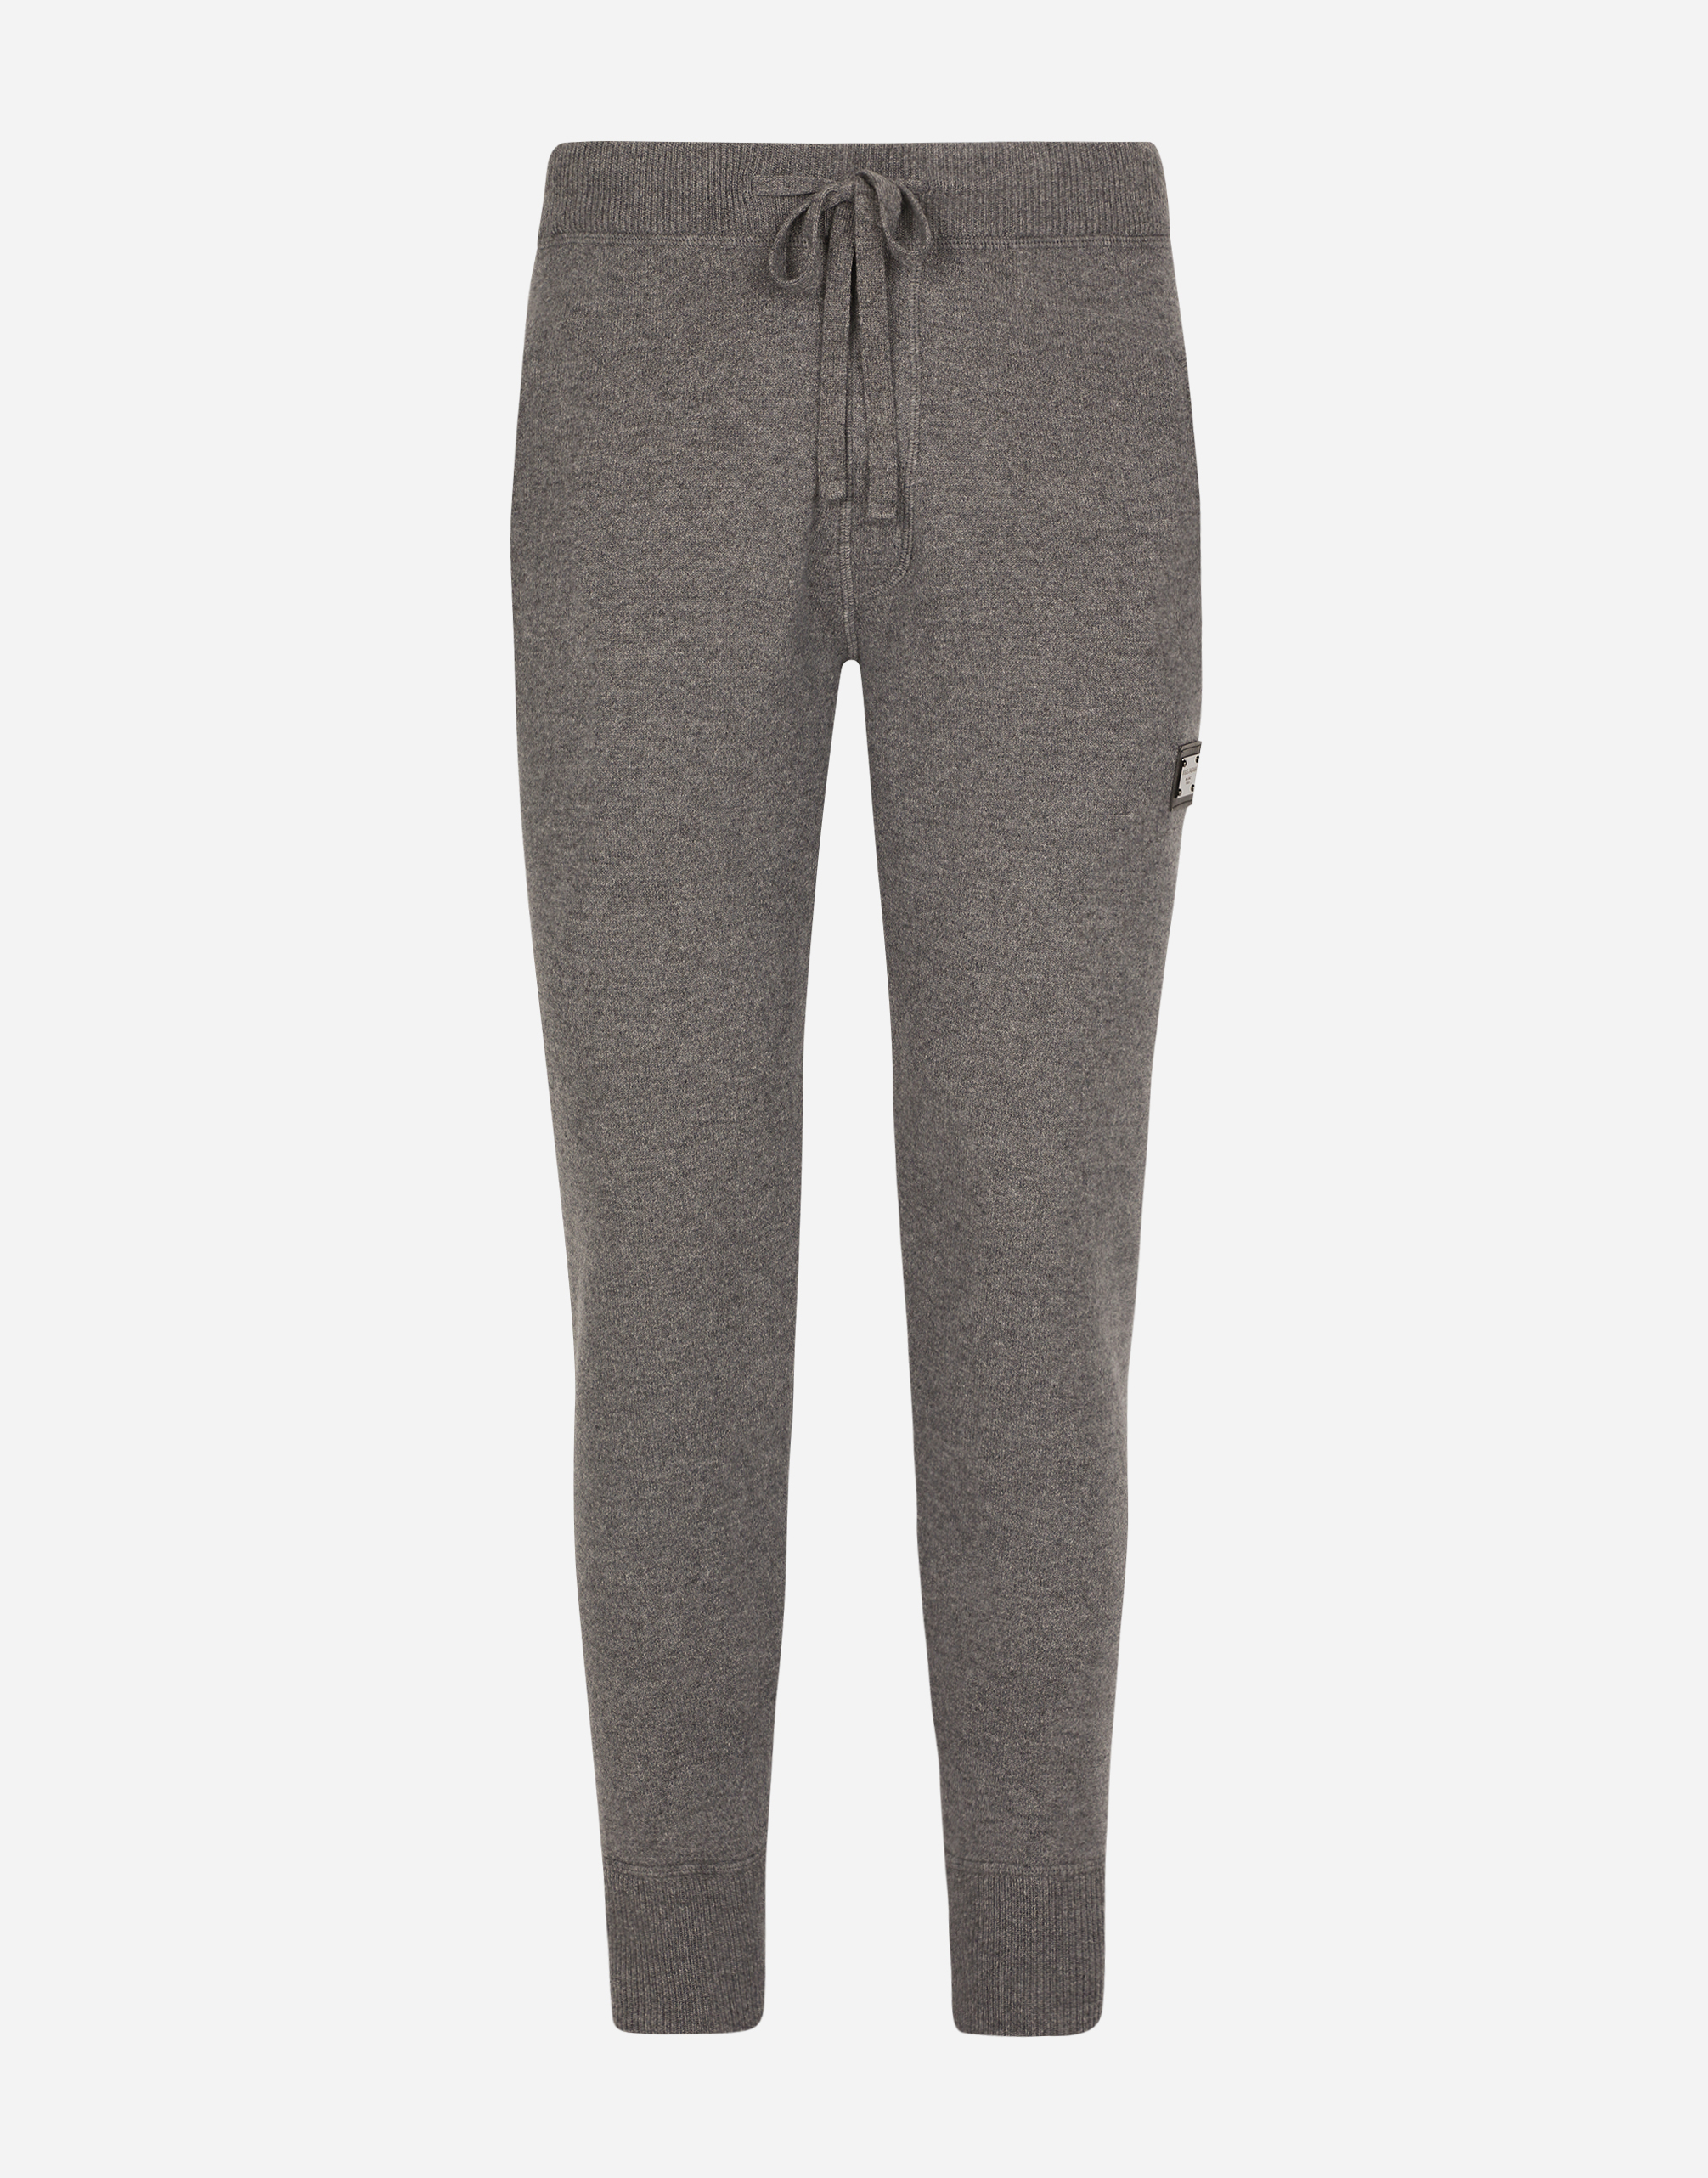 Wool and cashmere knit jogging pants in Grey